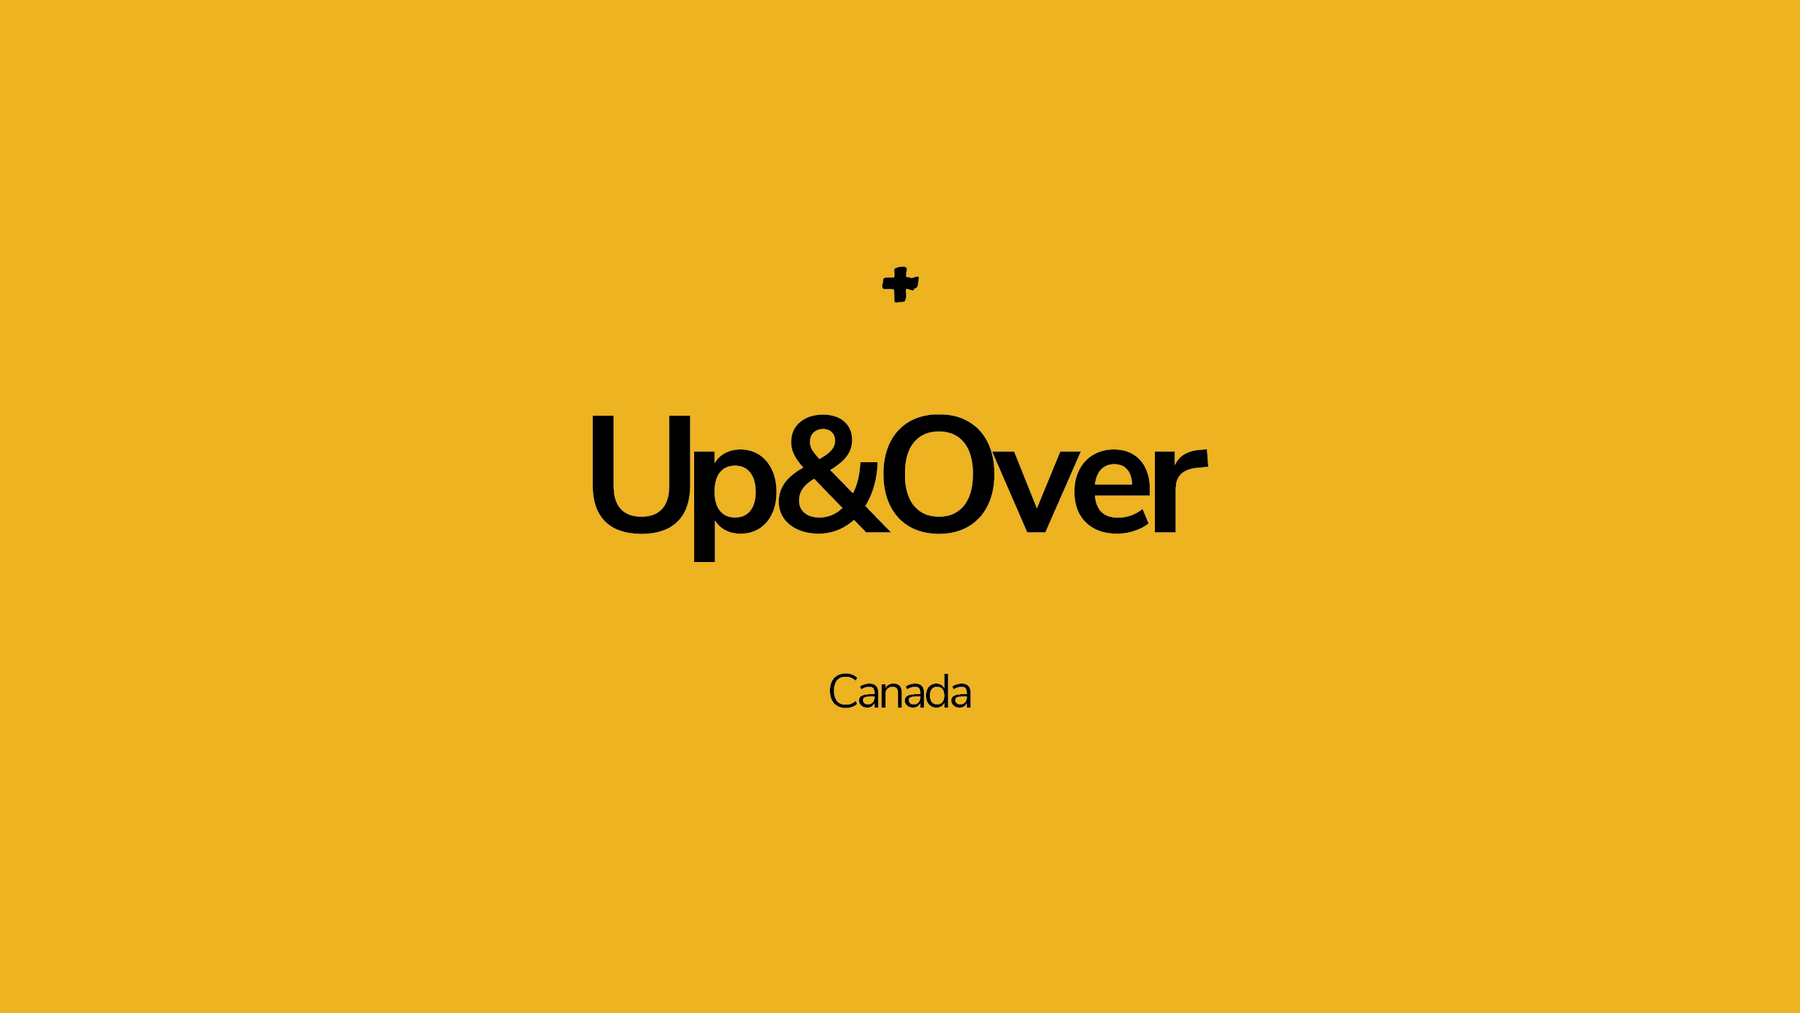 Up&Over: Canada